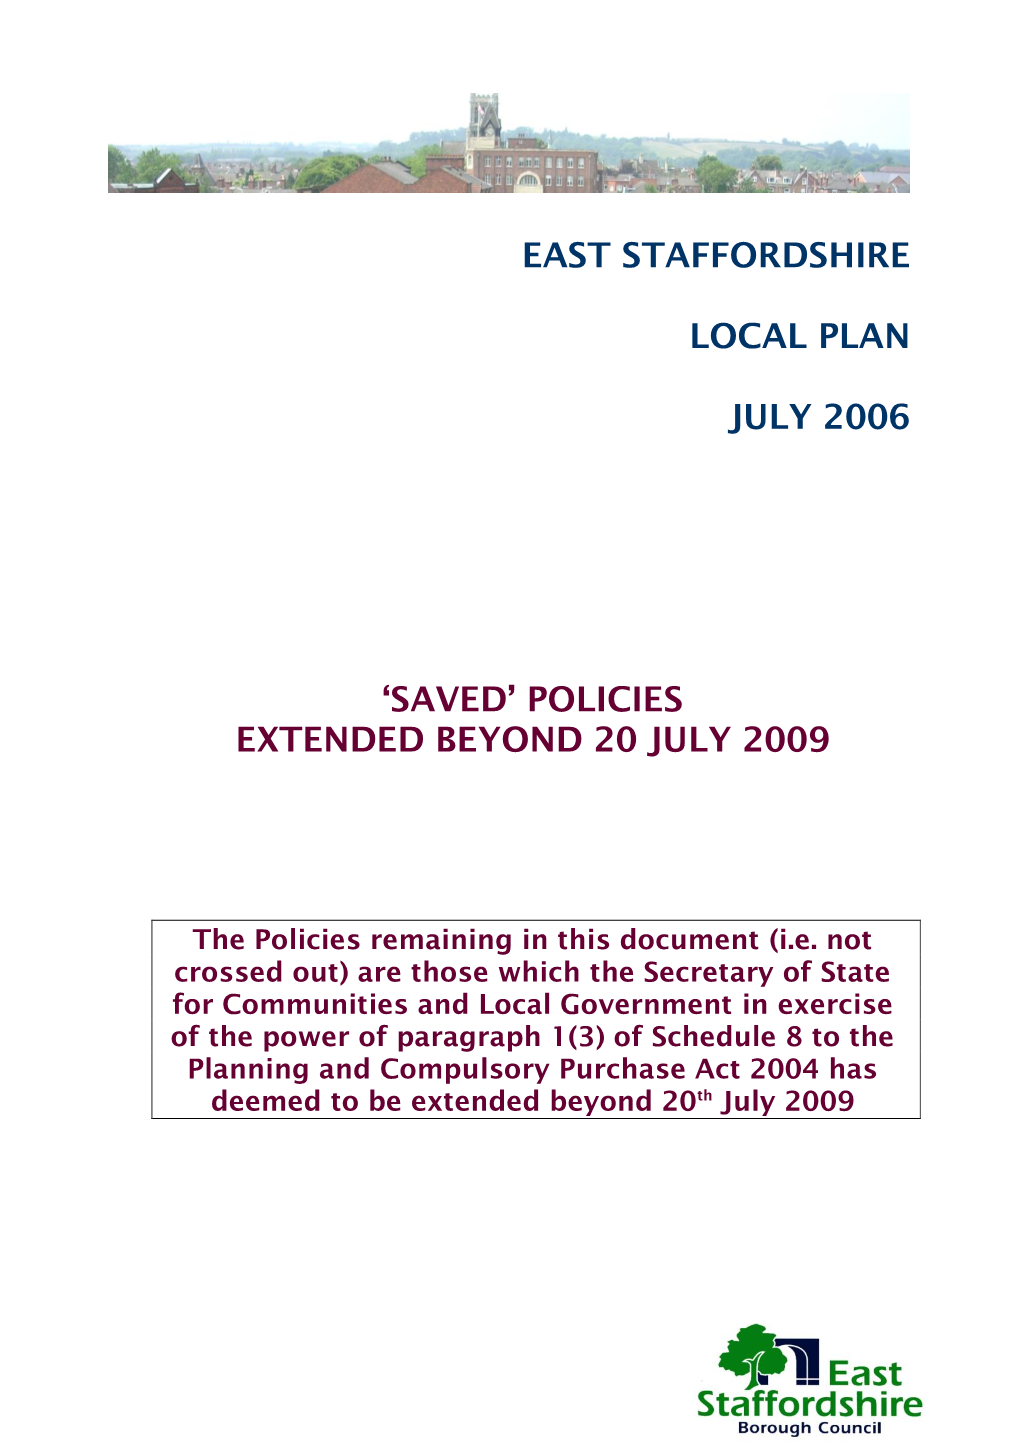 East Staffordshire Local Plan July 2006